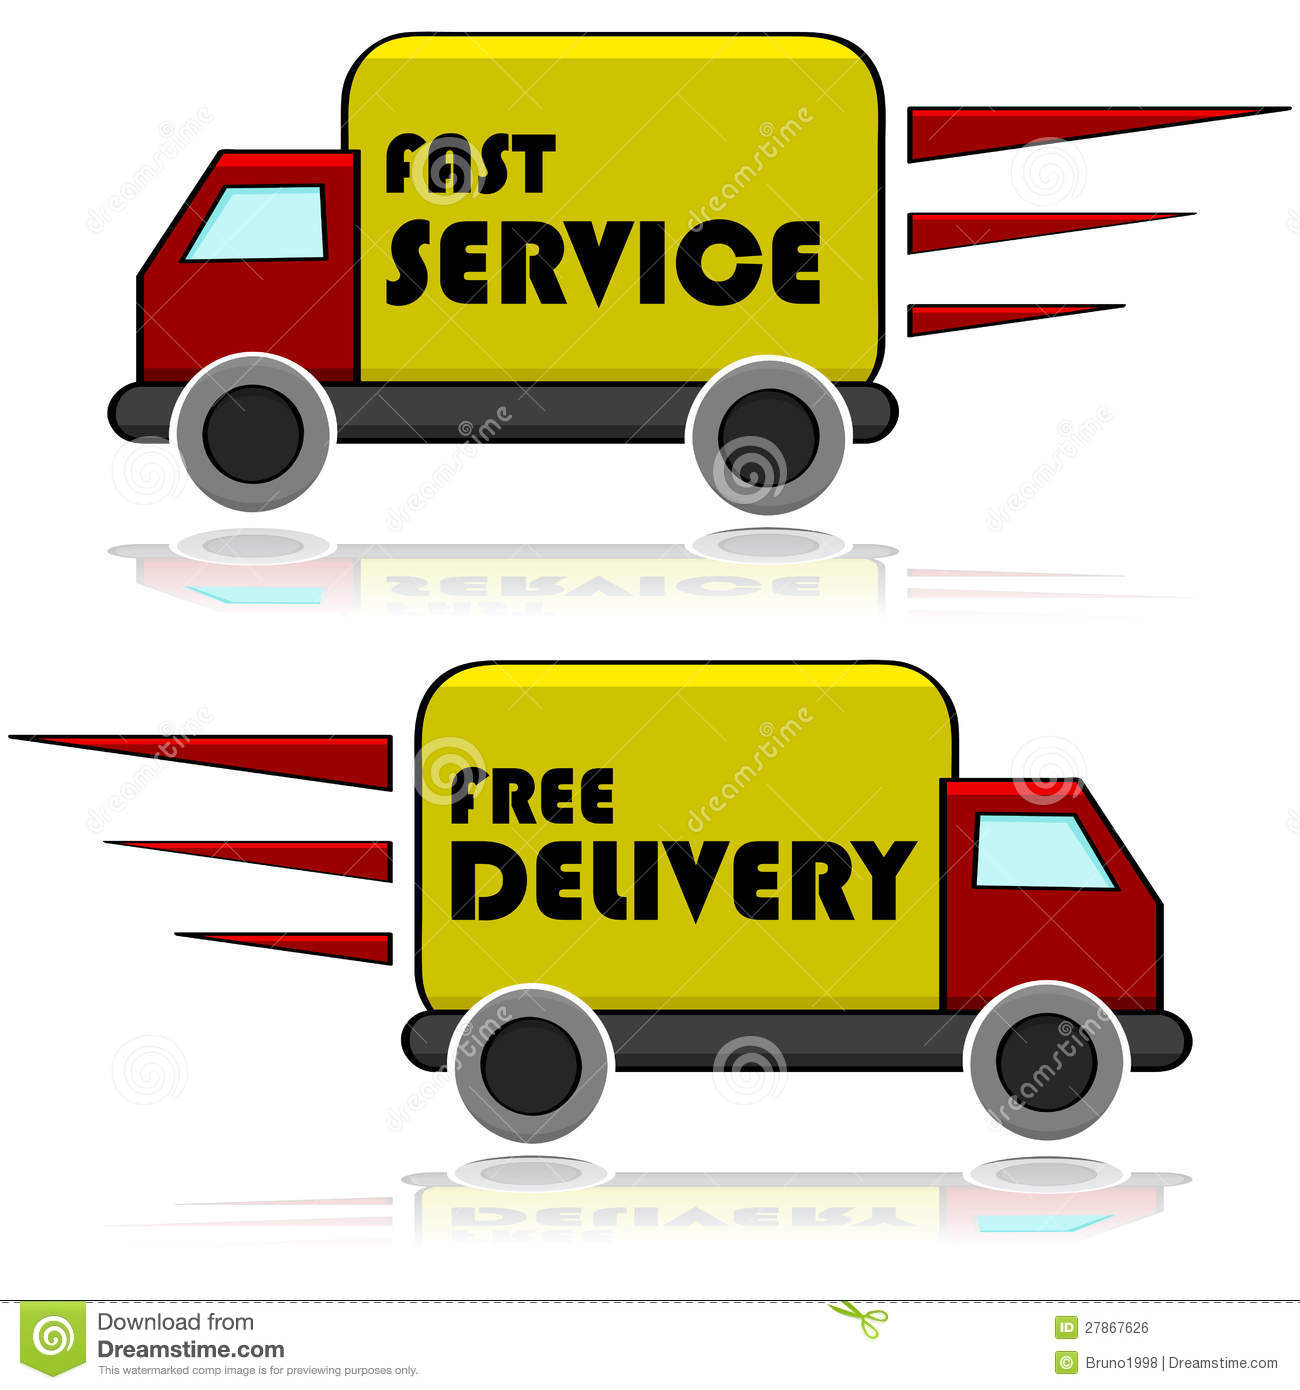     Showing A Truck With The Words Fast Service And Free Delivery